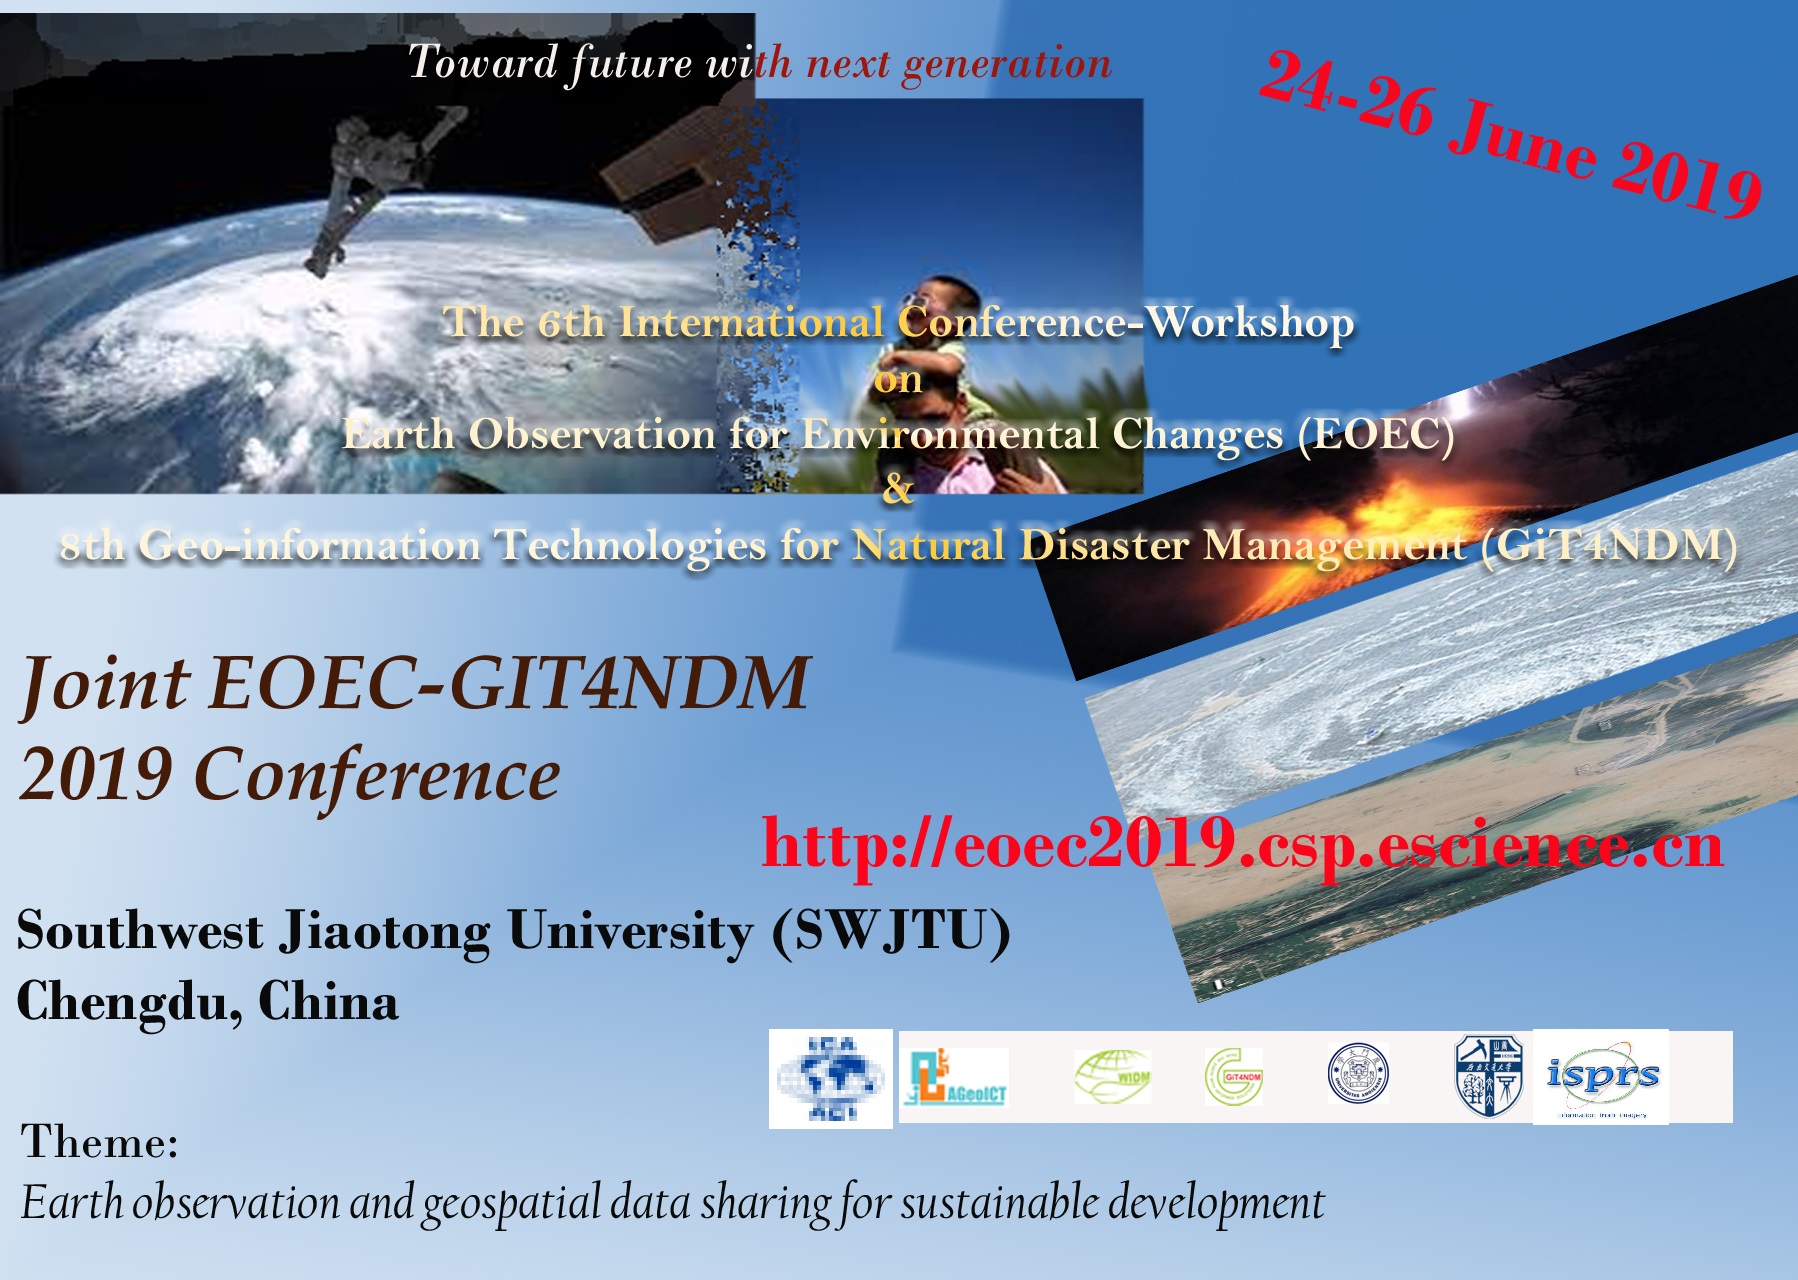 6th Conference for Earth Observation and Environmental Changes (EOEC) and the 8th Conference on Geoinformation Technologies for Natural Disaster...